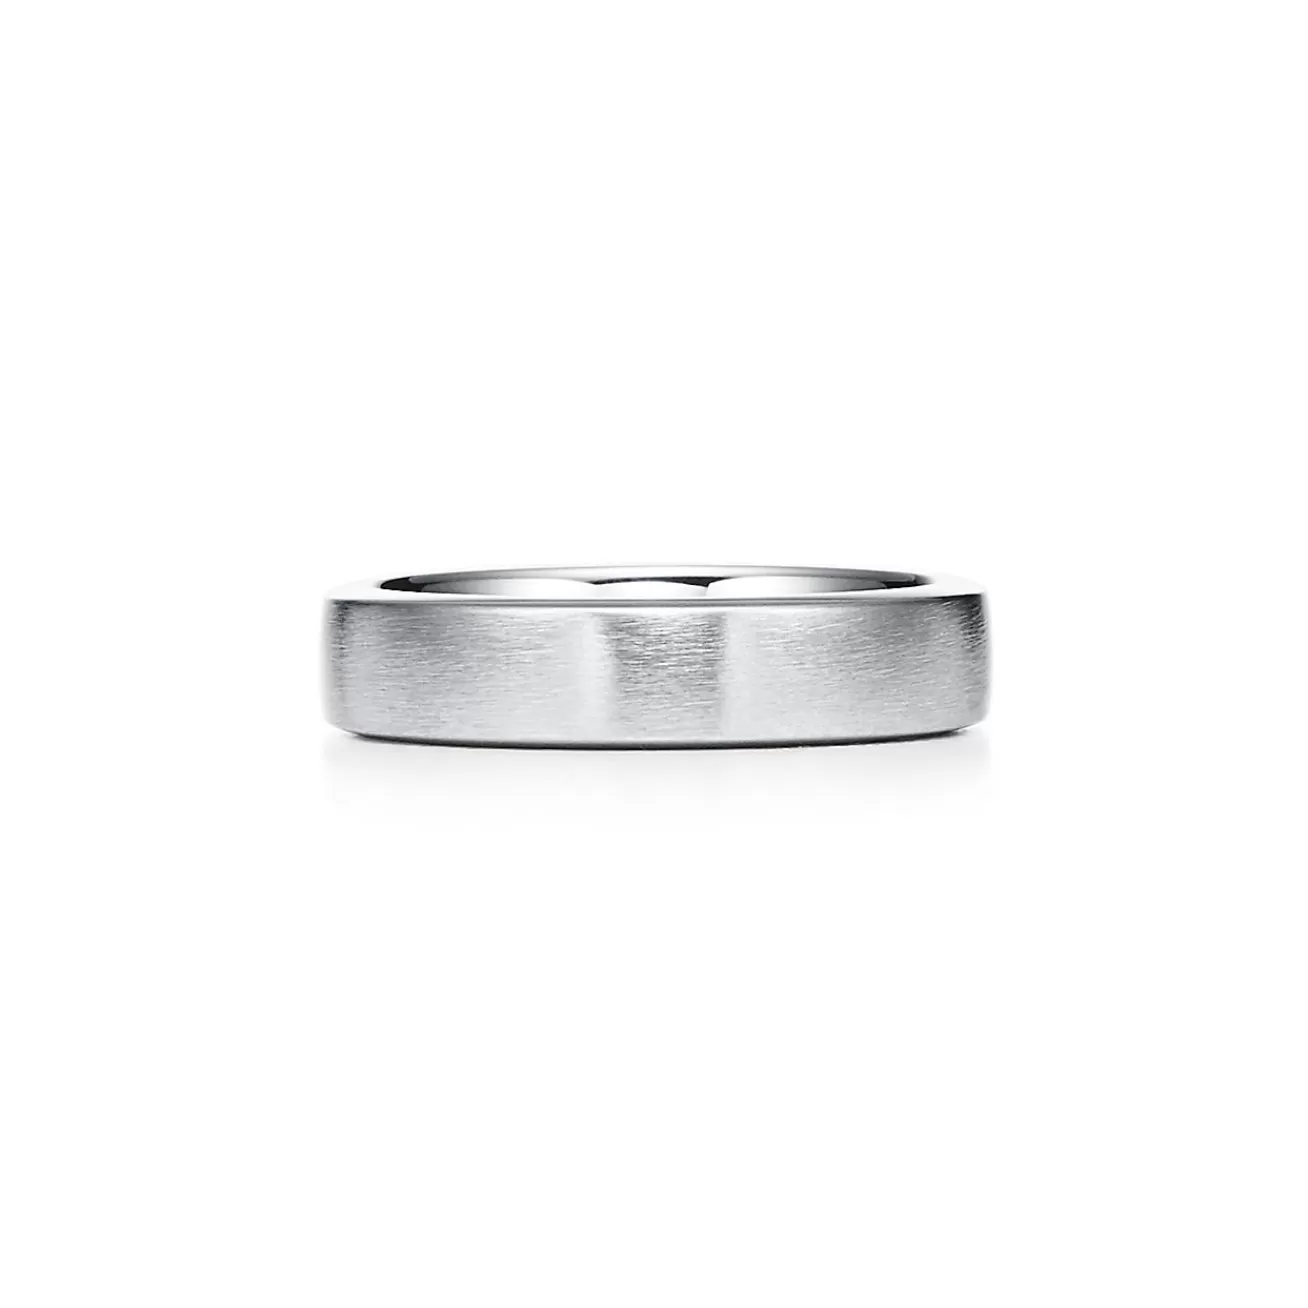 Tiffany & Co. The Charles Tiffany Setting Satin Finish Ring in Platinum, 5 mm Wide | ^ Rings | Men's Jewelry